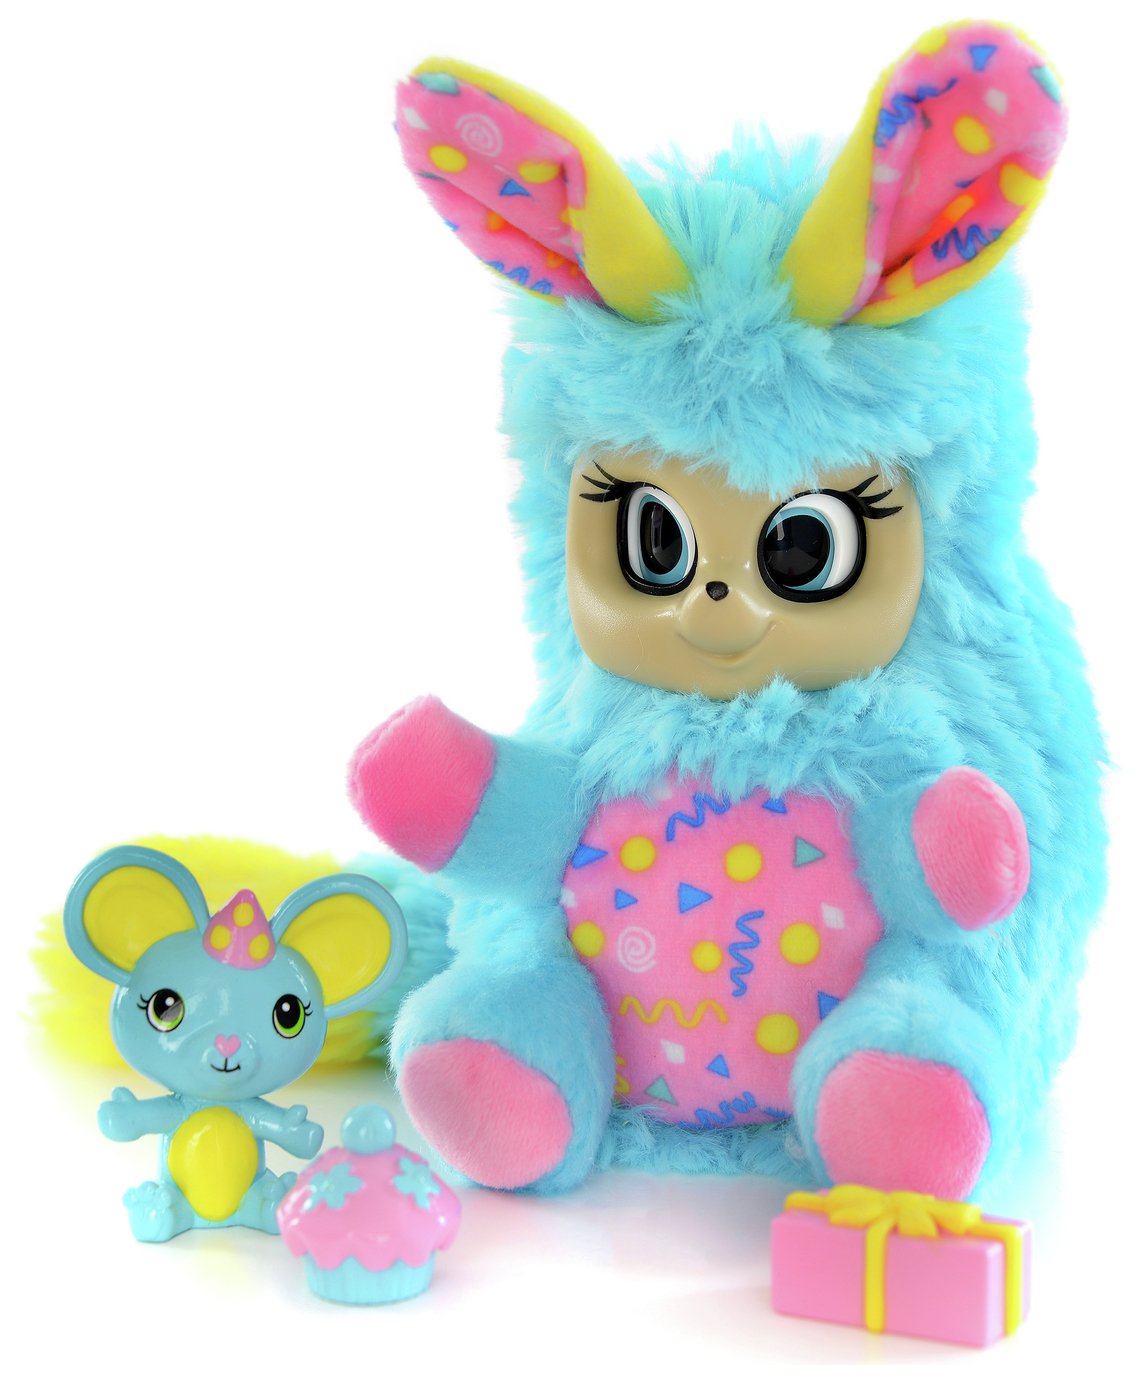 Bush Baby World with Accessories Reviews